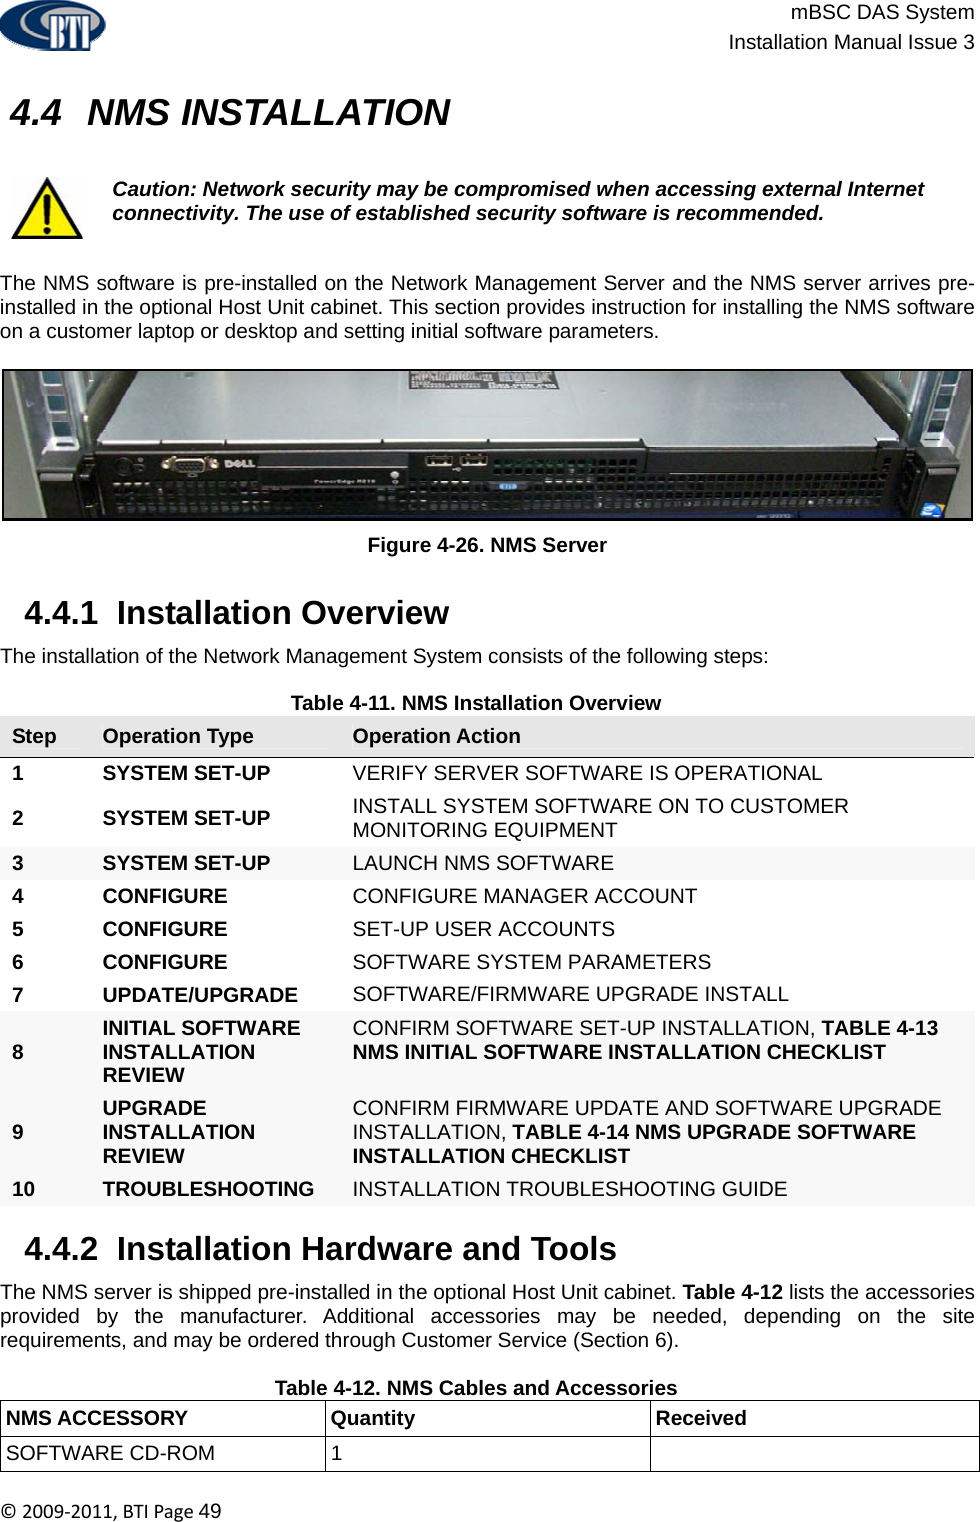                          mBSC DAS System  Installation Manual Issue 3  ©2009‐2011,BTIPage49   4.4  NMS INSTALLATION   Caution: Network security may be compromised when accessing external Internet connectivity. The use of established security software is recommended.  The NMS software is pre-installed on the Network Management Server and the NMS server arrives pre-installed in the optional Host Unit cabinet. This section provides instruction for installing the NMS software on a customer laptop or desktop and setting initial software parameters.  Figure 4-26. NMS Server   4.4.1  Installation Overview The installation of the Network Management System consists of the following steps:  Table 4-11. NMS Installation Overview Step  Operation Type  Operation Action 1 SYSTEM SET-UP VERIFY SERVER SOFTWARE IS OPERATIONAL 2 SYSTEM SET-UP INSTALL SYSTEM SOFTWARE ON TO CUSTOMER  MONITORING EQUIPMENT 3  SYSTEM SET-UP  LAUNCH NMS SOFTWARE 4 CONFIGURE  CONFIGURE MANAGER ACCOUNT 5 CONFIGURE  SET-UP USER ACCOUNTS 6 CONFIGURE  SOFTWARE SYSTEM PARAMETERS 7 UPDATE/UPGRADE SOFTWARE/FIRMWARE UPGRADE INSTALL 8  INITIAL SOFTWARE INSTALLATION REVIEW CONFIRM SOFTWARE SET-UP INSTALLATION, TABLE 4-13 NMS INITIAL SOFTWARE INSTALLATION CHECKLIST 9  UPGRADE INSTALLATION REVIEW CONFIRM FIRMWARE UPDATE AND SOFTWARE UPGRADE INSTALLATION, TABLE 4-14 NMS UPGRADE SOFTWARE INSTALLATION CHECKLIST 10  TROUBLESHOOTING  INSTALLATION TROUBLESHOOTING GUIDE   4.4.2  Installation Hardware and Tools The NMS server is shipped pre-installed in the optional Host Unit cabinet. Table 4-12 lists the accessories provided by the manufacturer. Additional accessories may be needed, depending on the site requirements, and may be ordered through Customer Service (Section 6).  Table 4-12. NMS Cables and Accessories NMS ACCESSORY  Quantity  Received SOFTWARE CD-ROM  1   